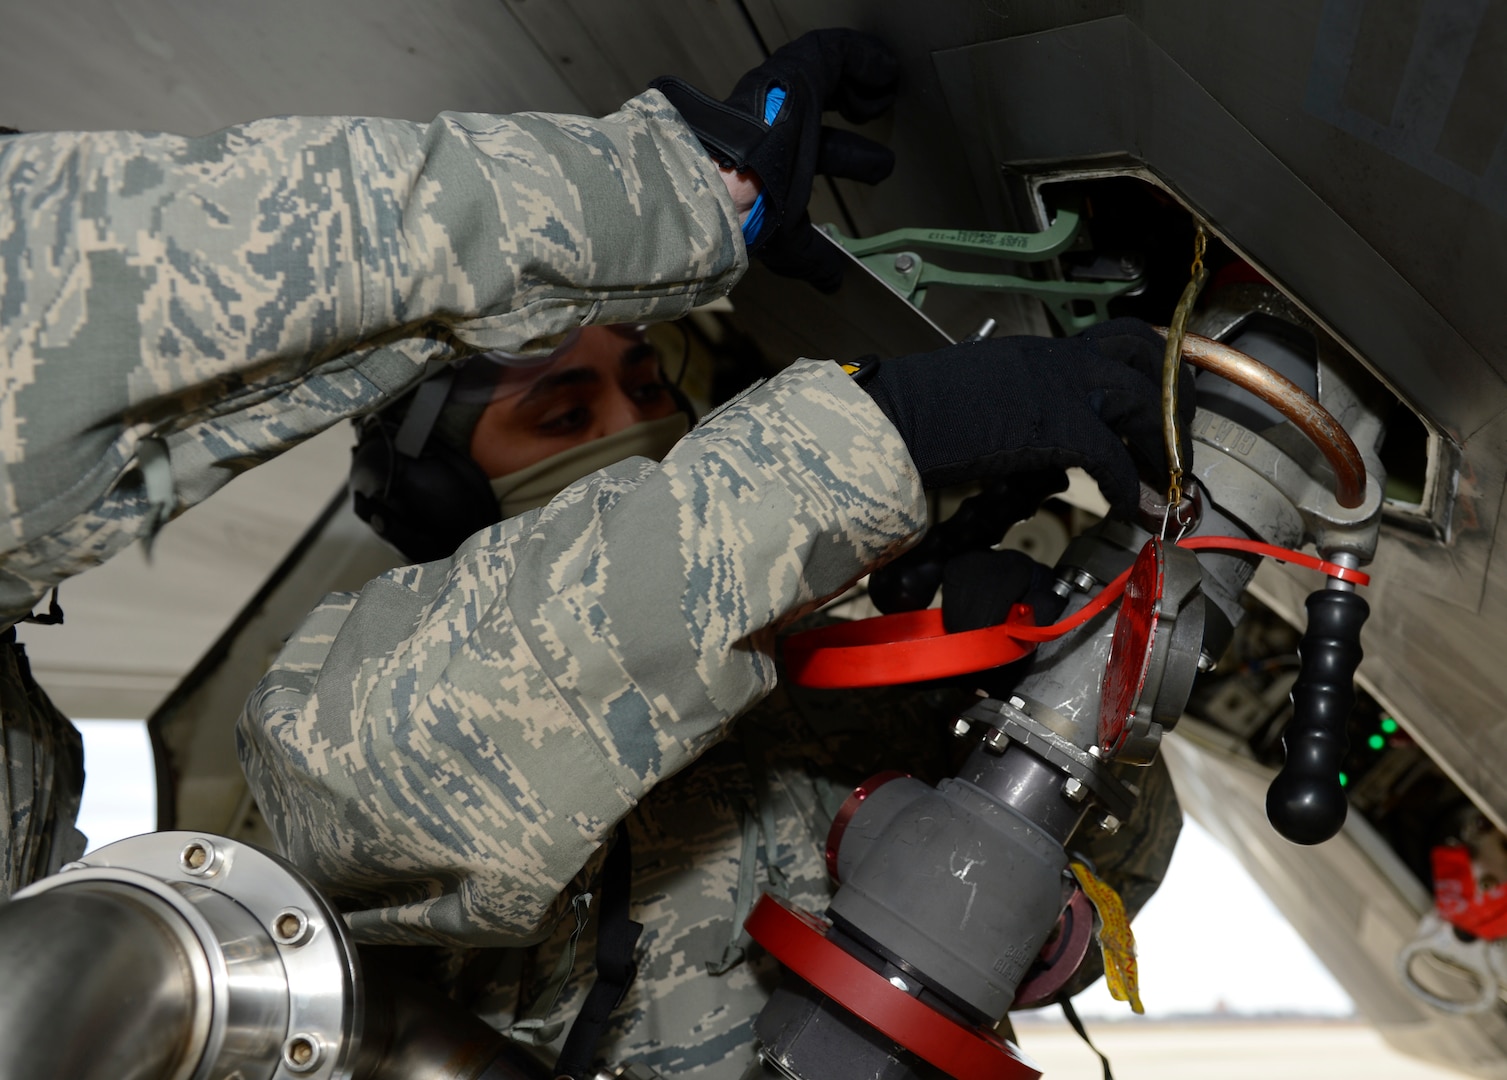 A U.S. Air Force 1st Aircraft Maintenance Squadron crew chief tightens the fuel line nozzle to the F-22 Raptor’s fuel tank during a hot pit refuel at Joint Base Langley-Eustis, Va., Jan. 6, 2017. Hot pits are performed while the engine of the plane is running to allow aircraft to launch quickly after refueling. (U.S. Air Force photo by Airman 1st Class Kaylee Dubois)